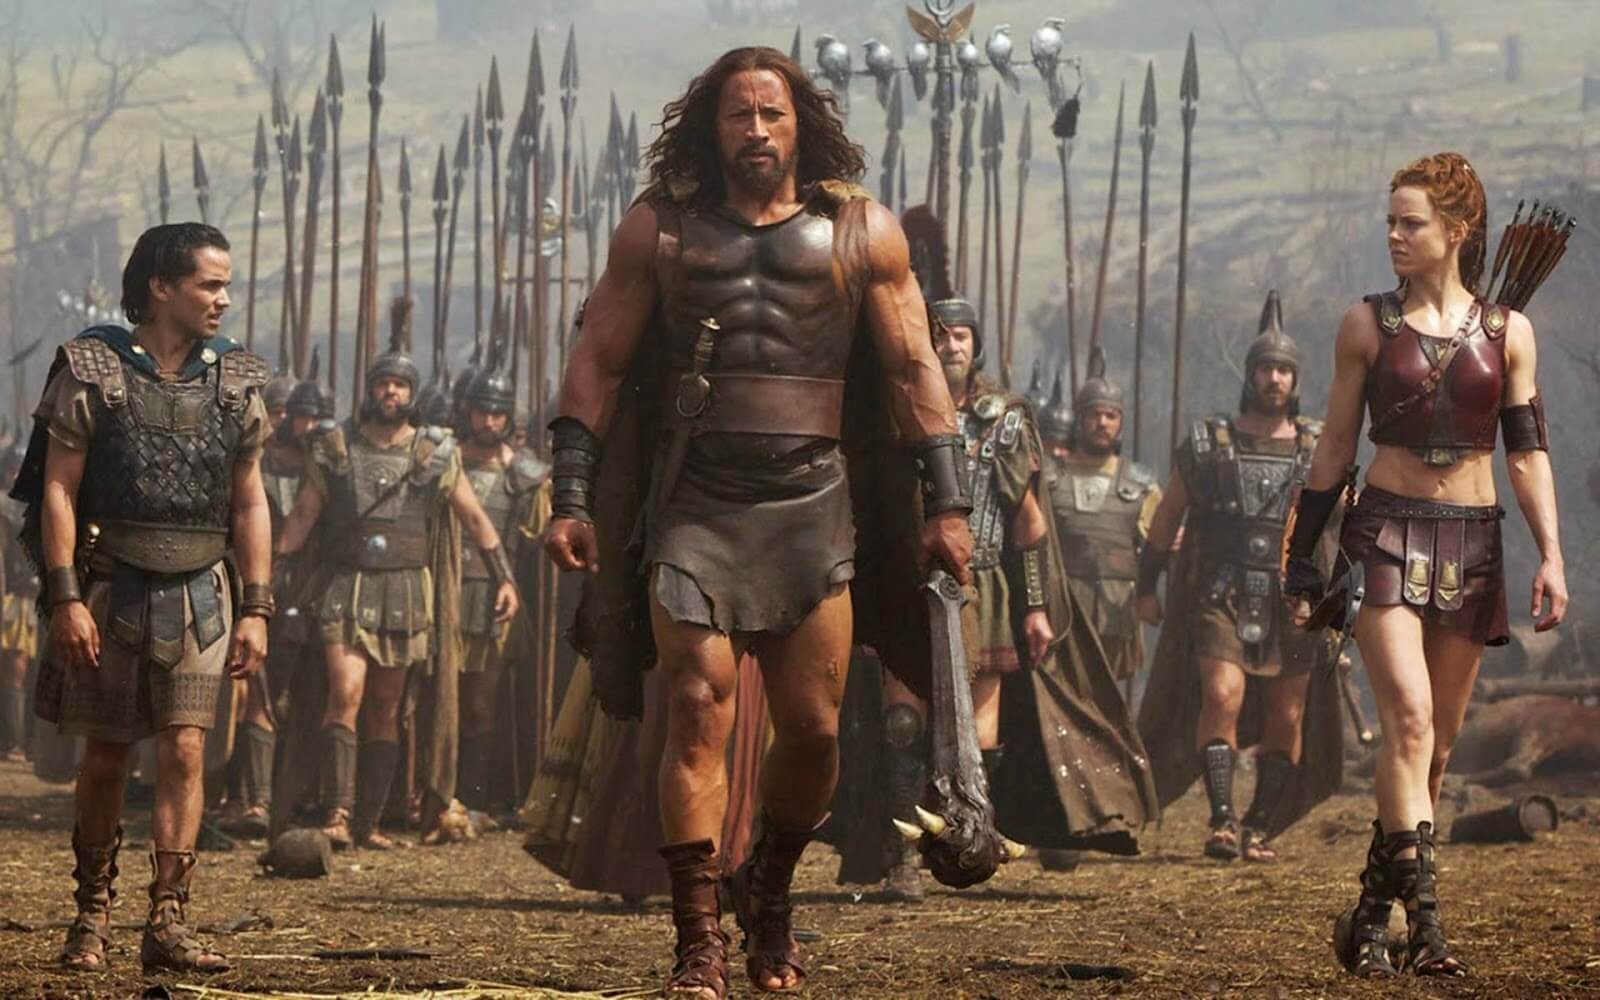 Johnson in a still from the movie Hercules